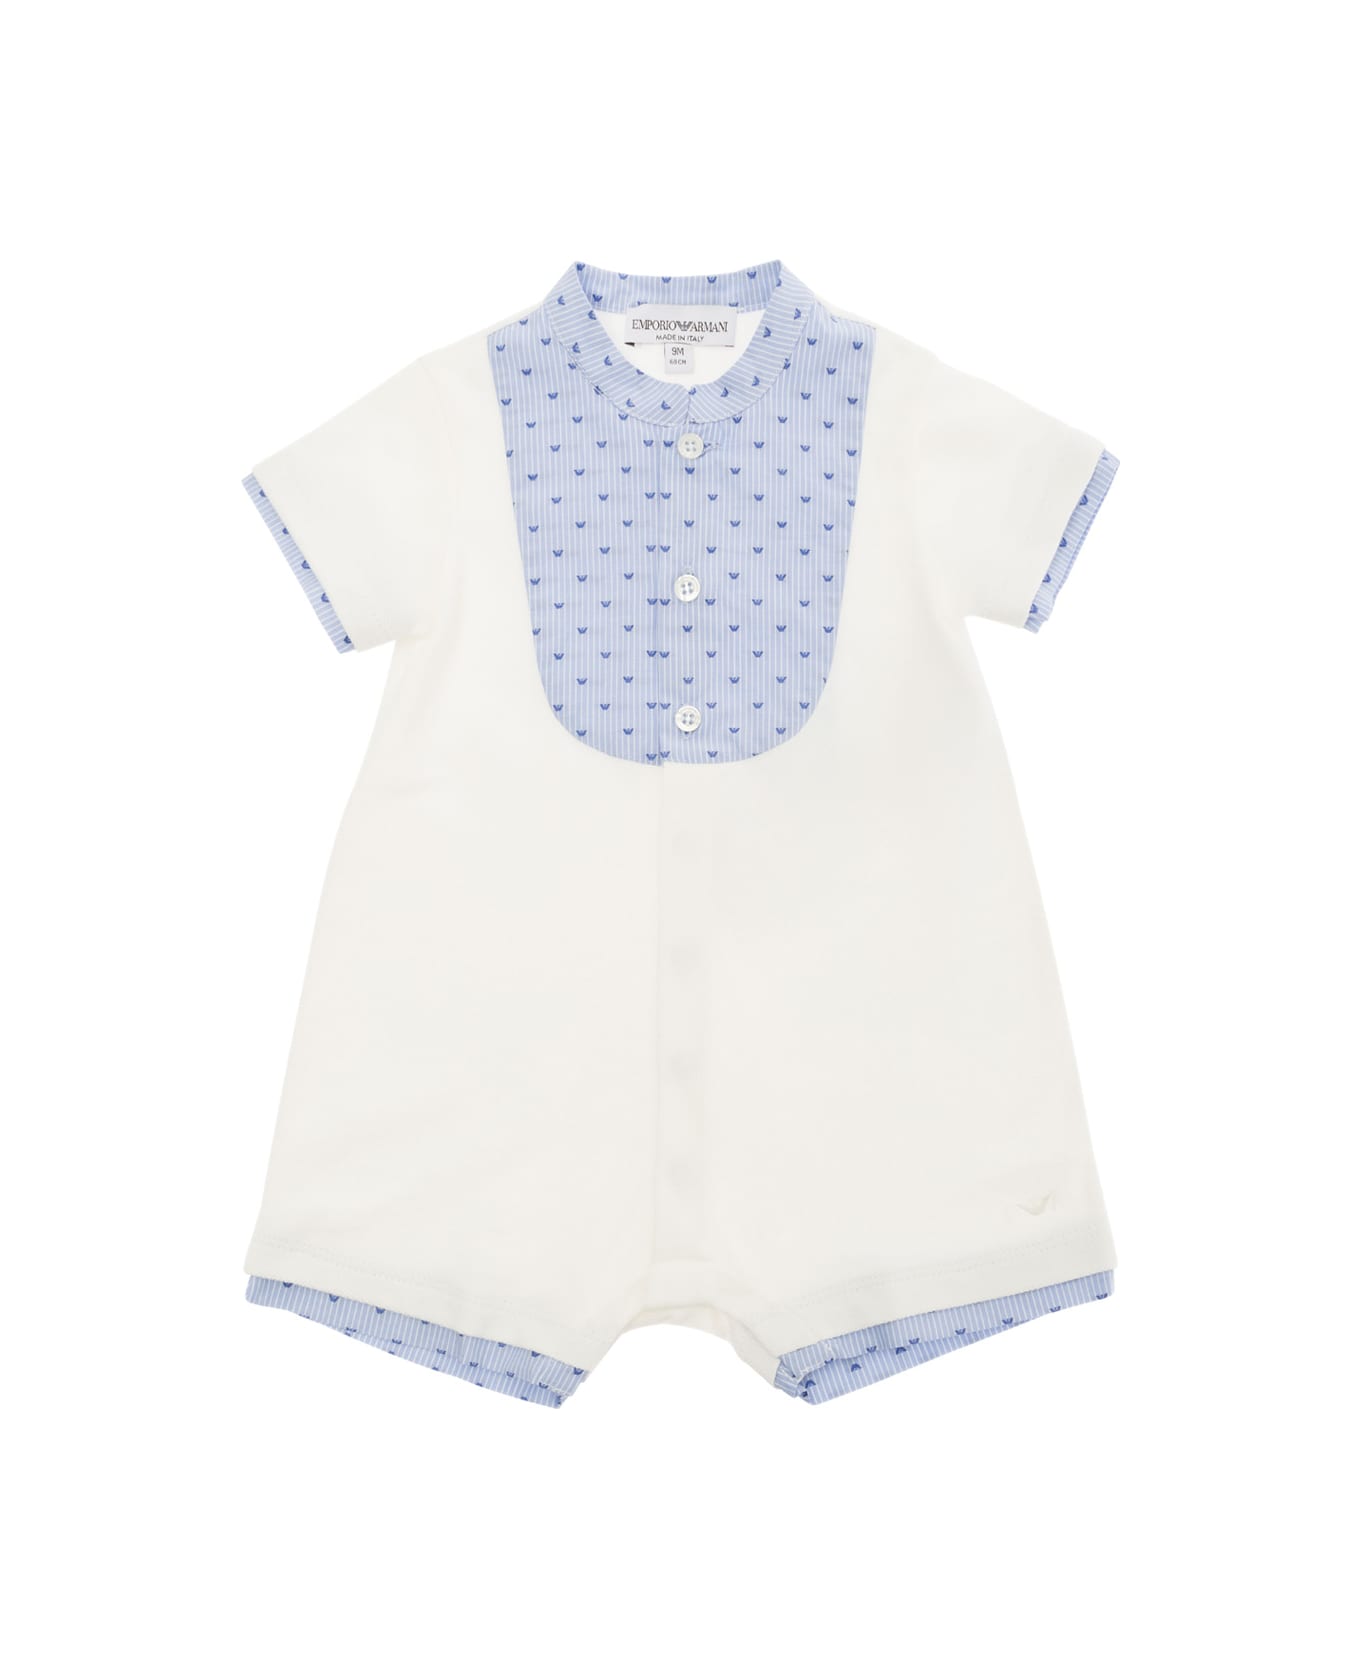 Emporio Armani Light Blue And White Onesie With Stripe And Logo Motif In Cotton Baby - Multicolor